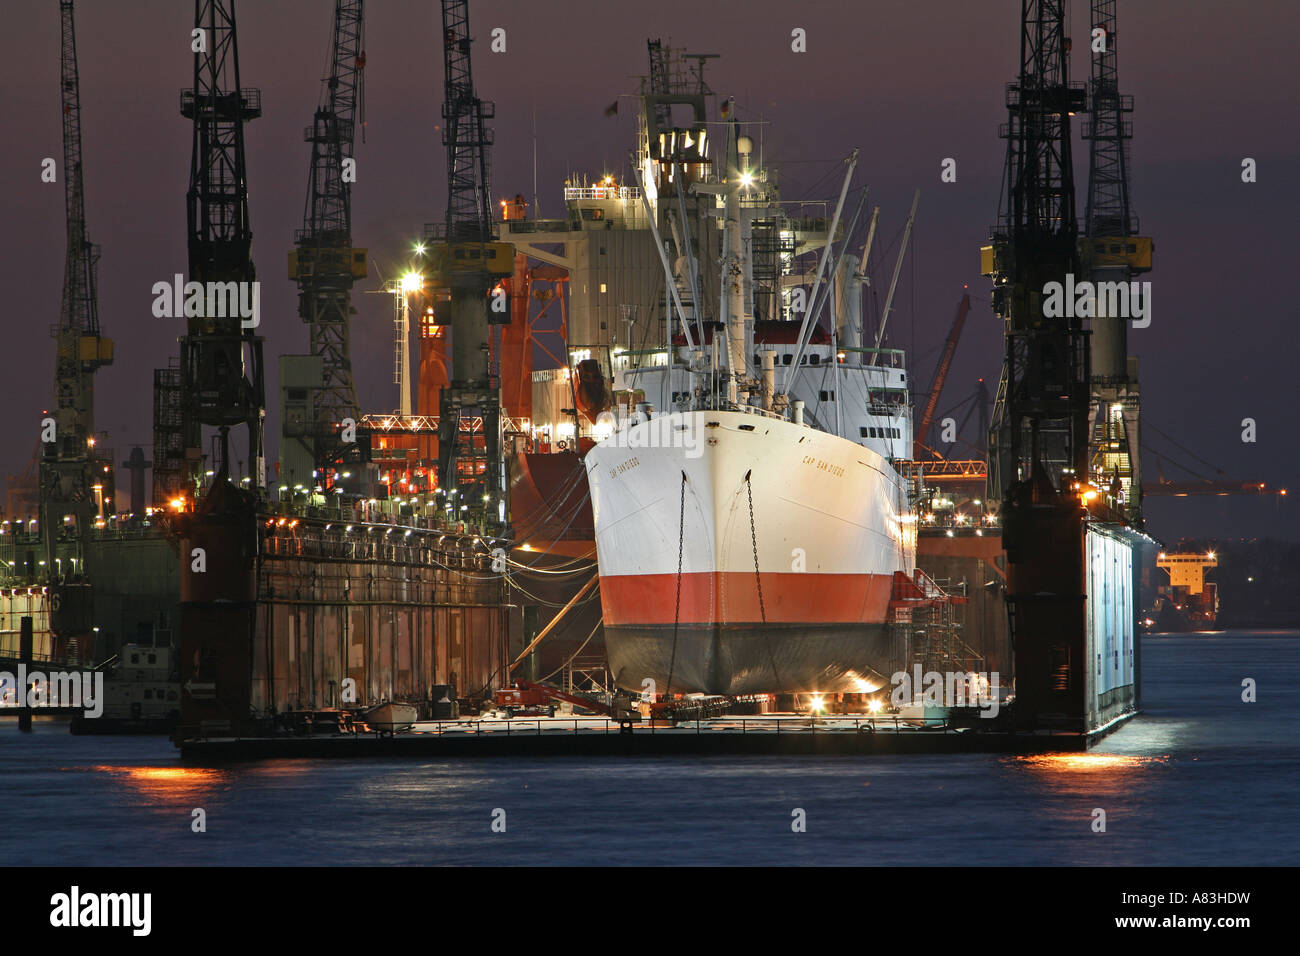 The museums ship Cap San Diego in the swimming dock of shipyard Blohm + Voss in Hamburg Stock Photo